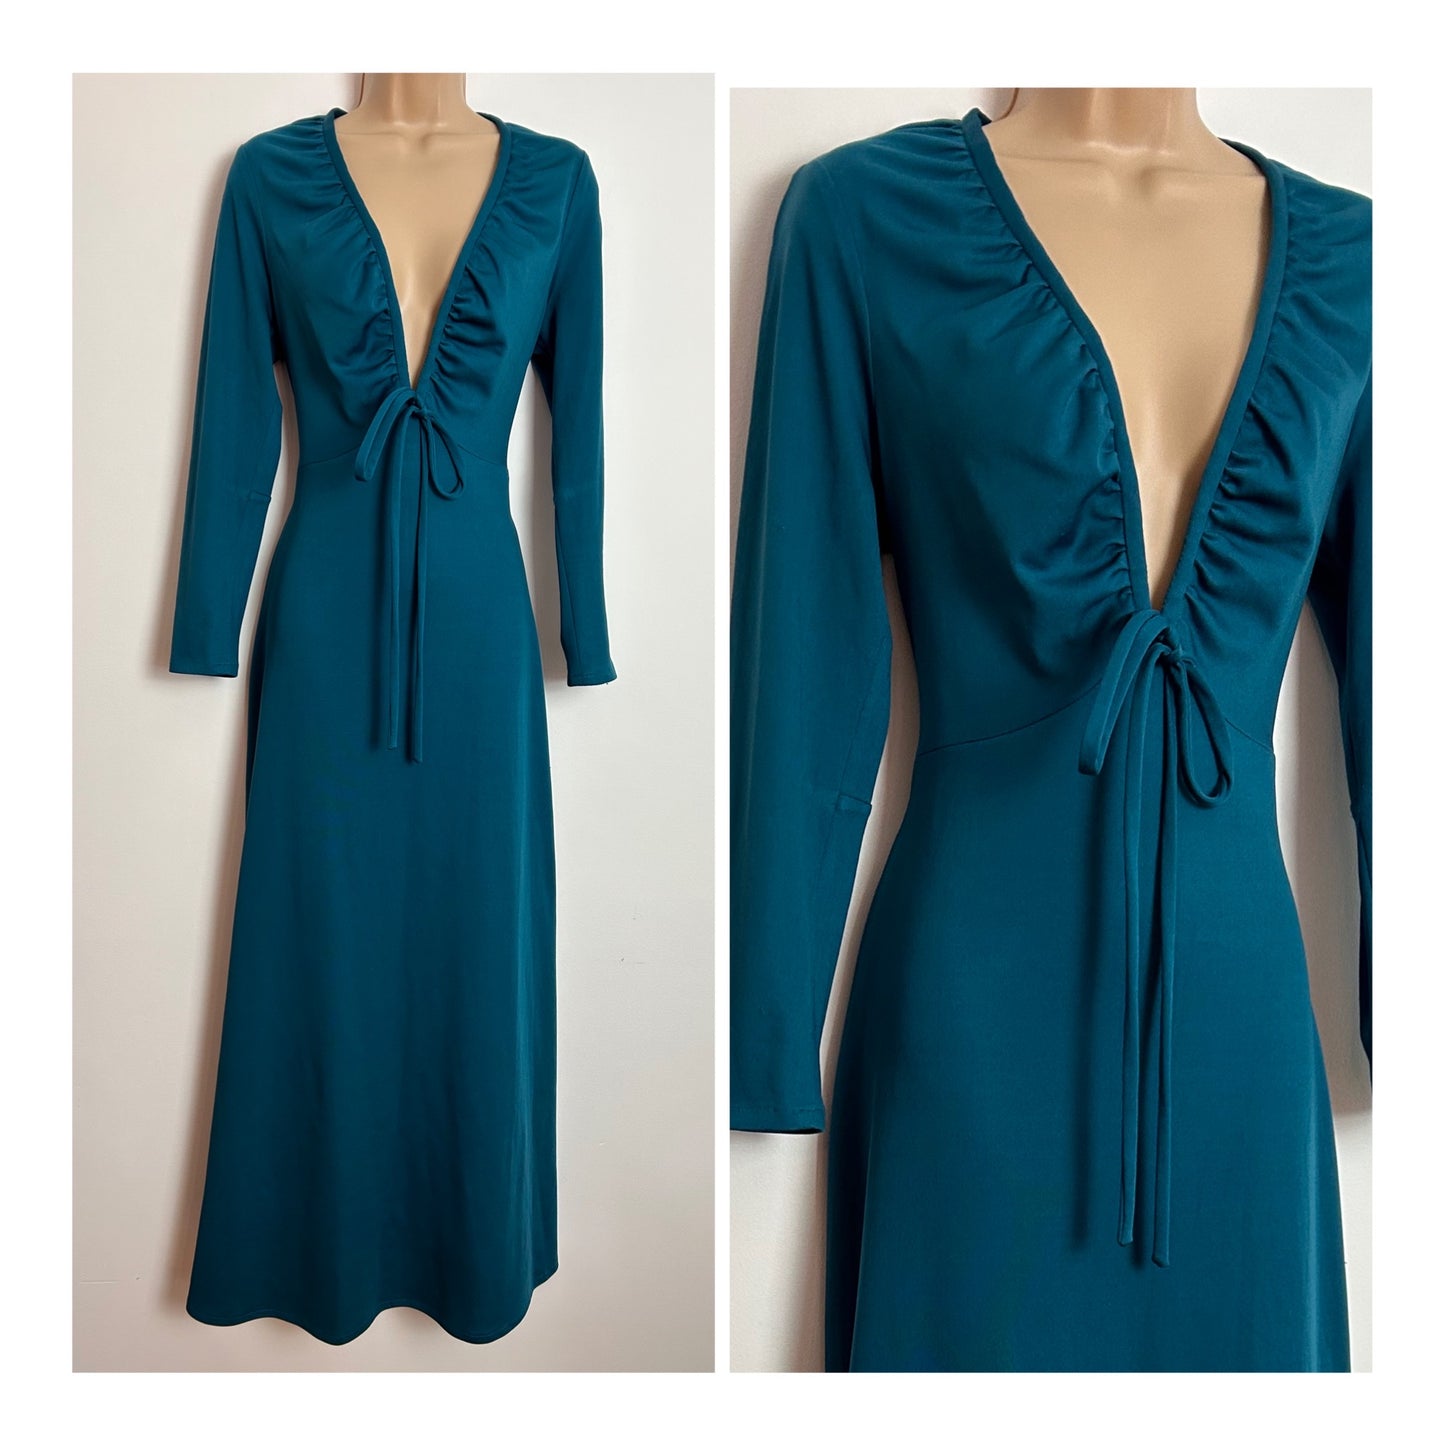 Vintage 1970s Approx UK Size 10-12 Teal Long Sleeve Plunge Neck Bow Detail Long Sleeve Boho Maxi Dress by Devonshire Lady